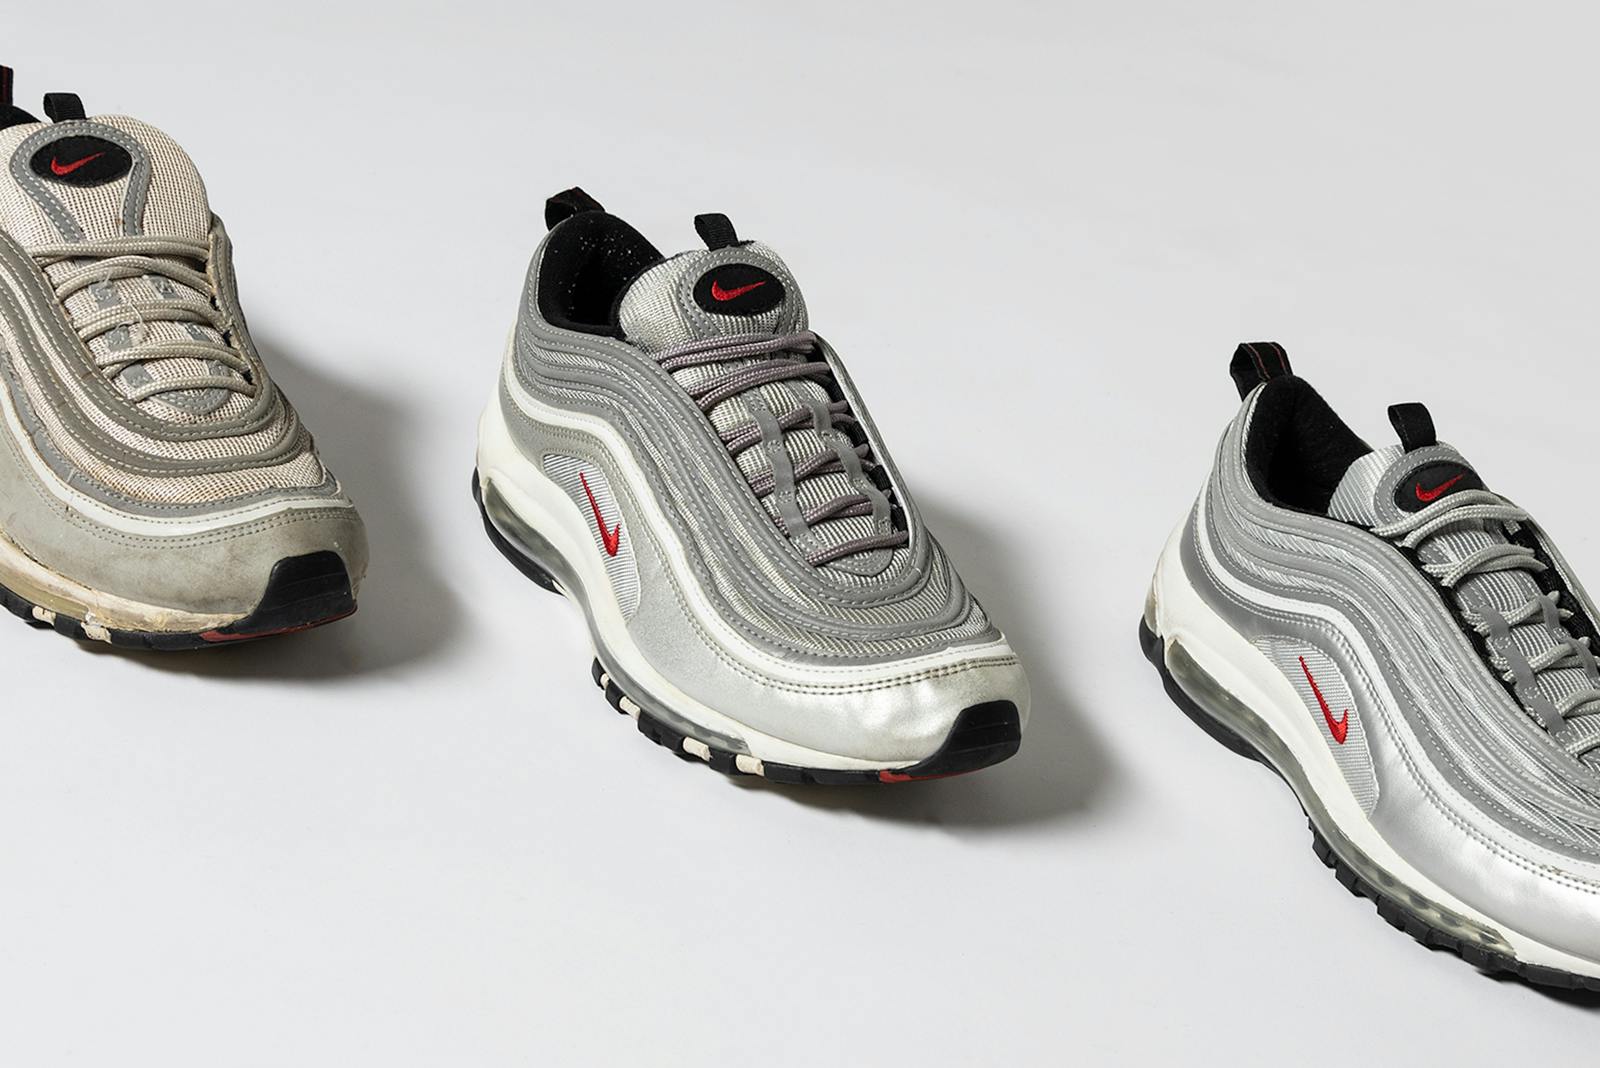 PROGRESSIVE PERMANENCE: The Story of Nike's Air Max 97 “Silver Bullet”